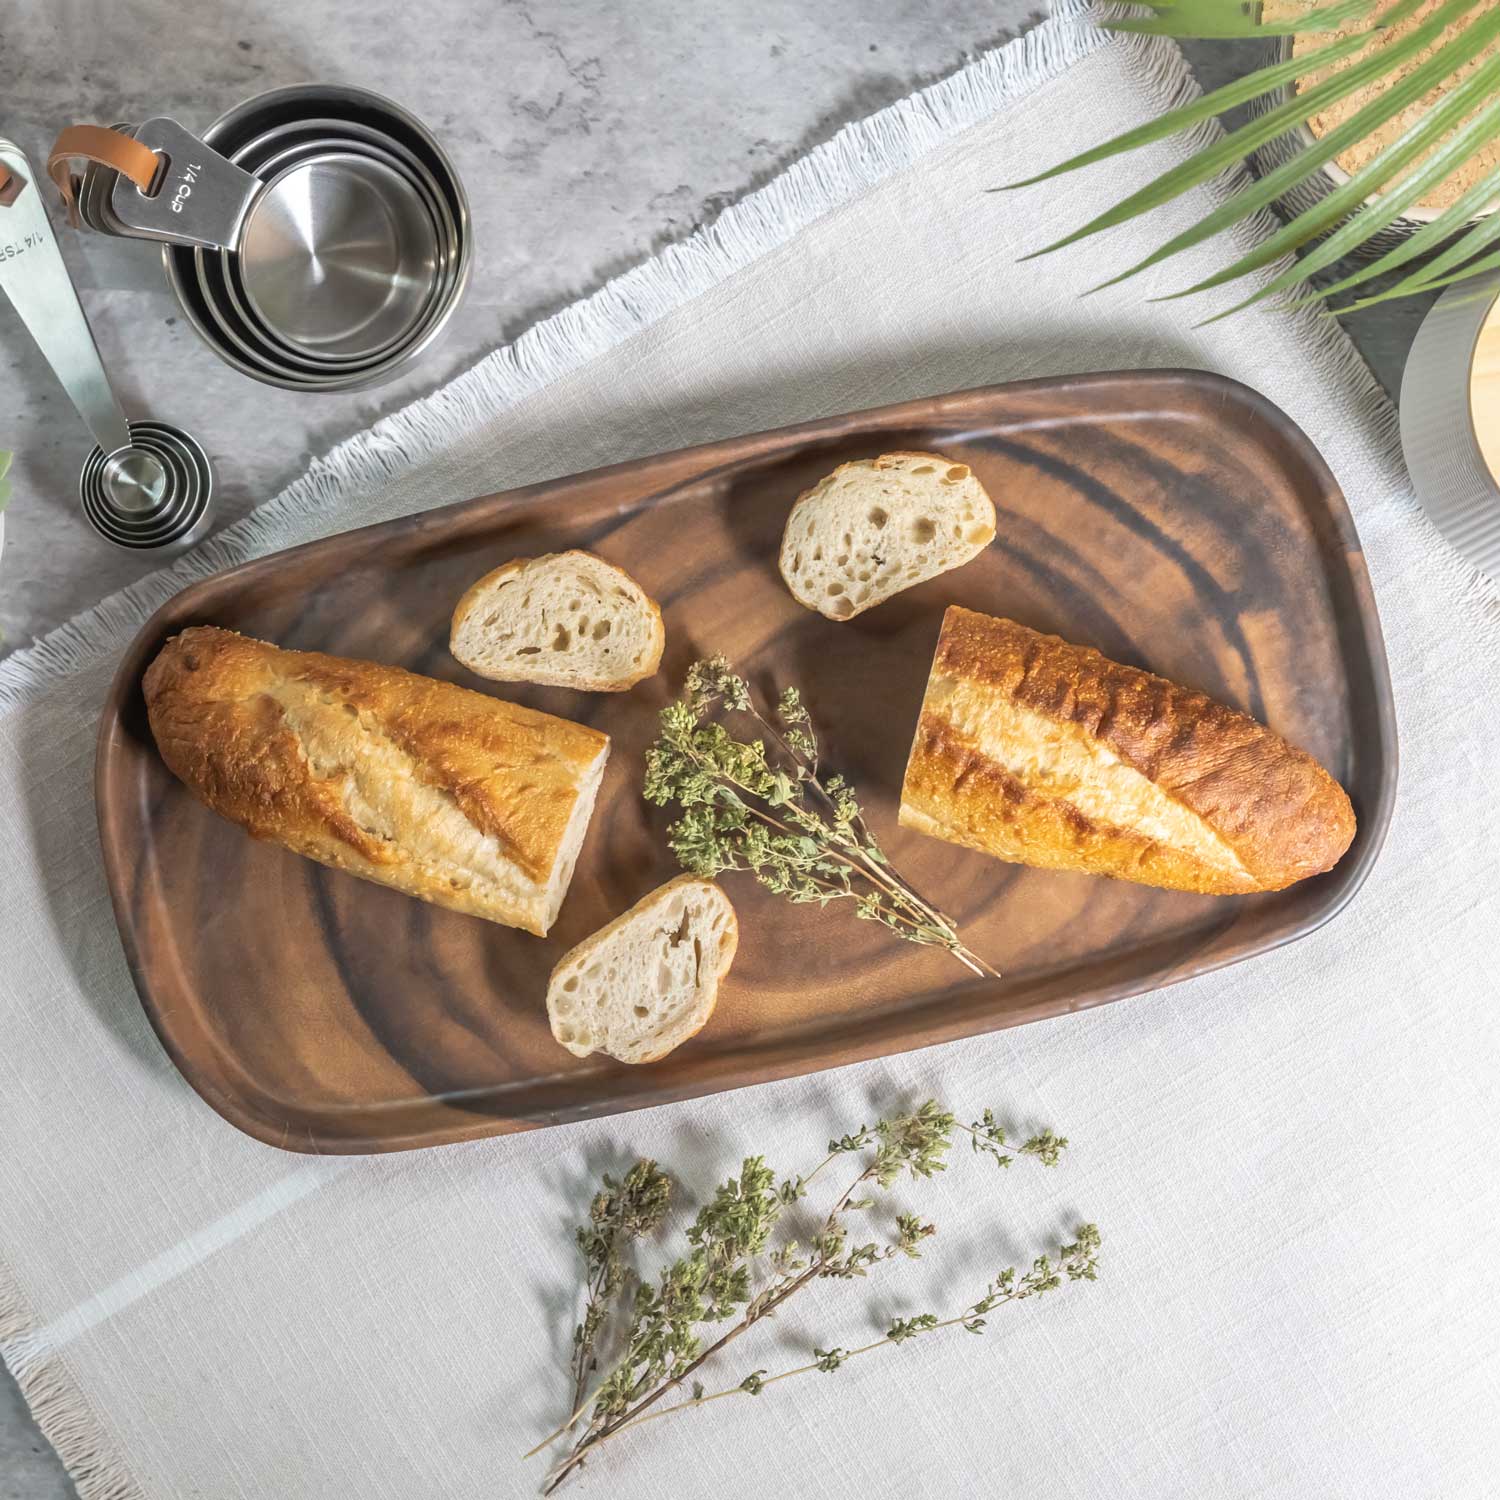 Melamine Wood Appetizer Tray: Merritt Designs Sequoia 14.5-inch Tray with bread